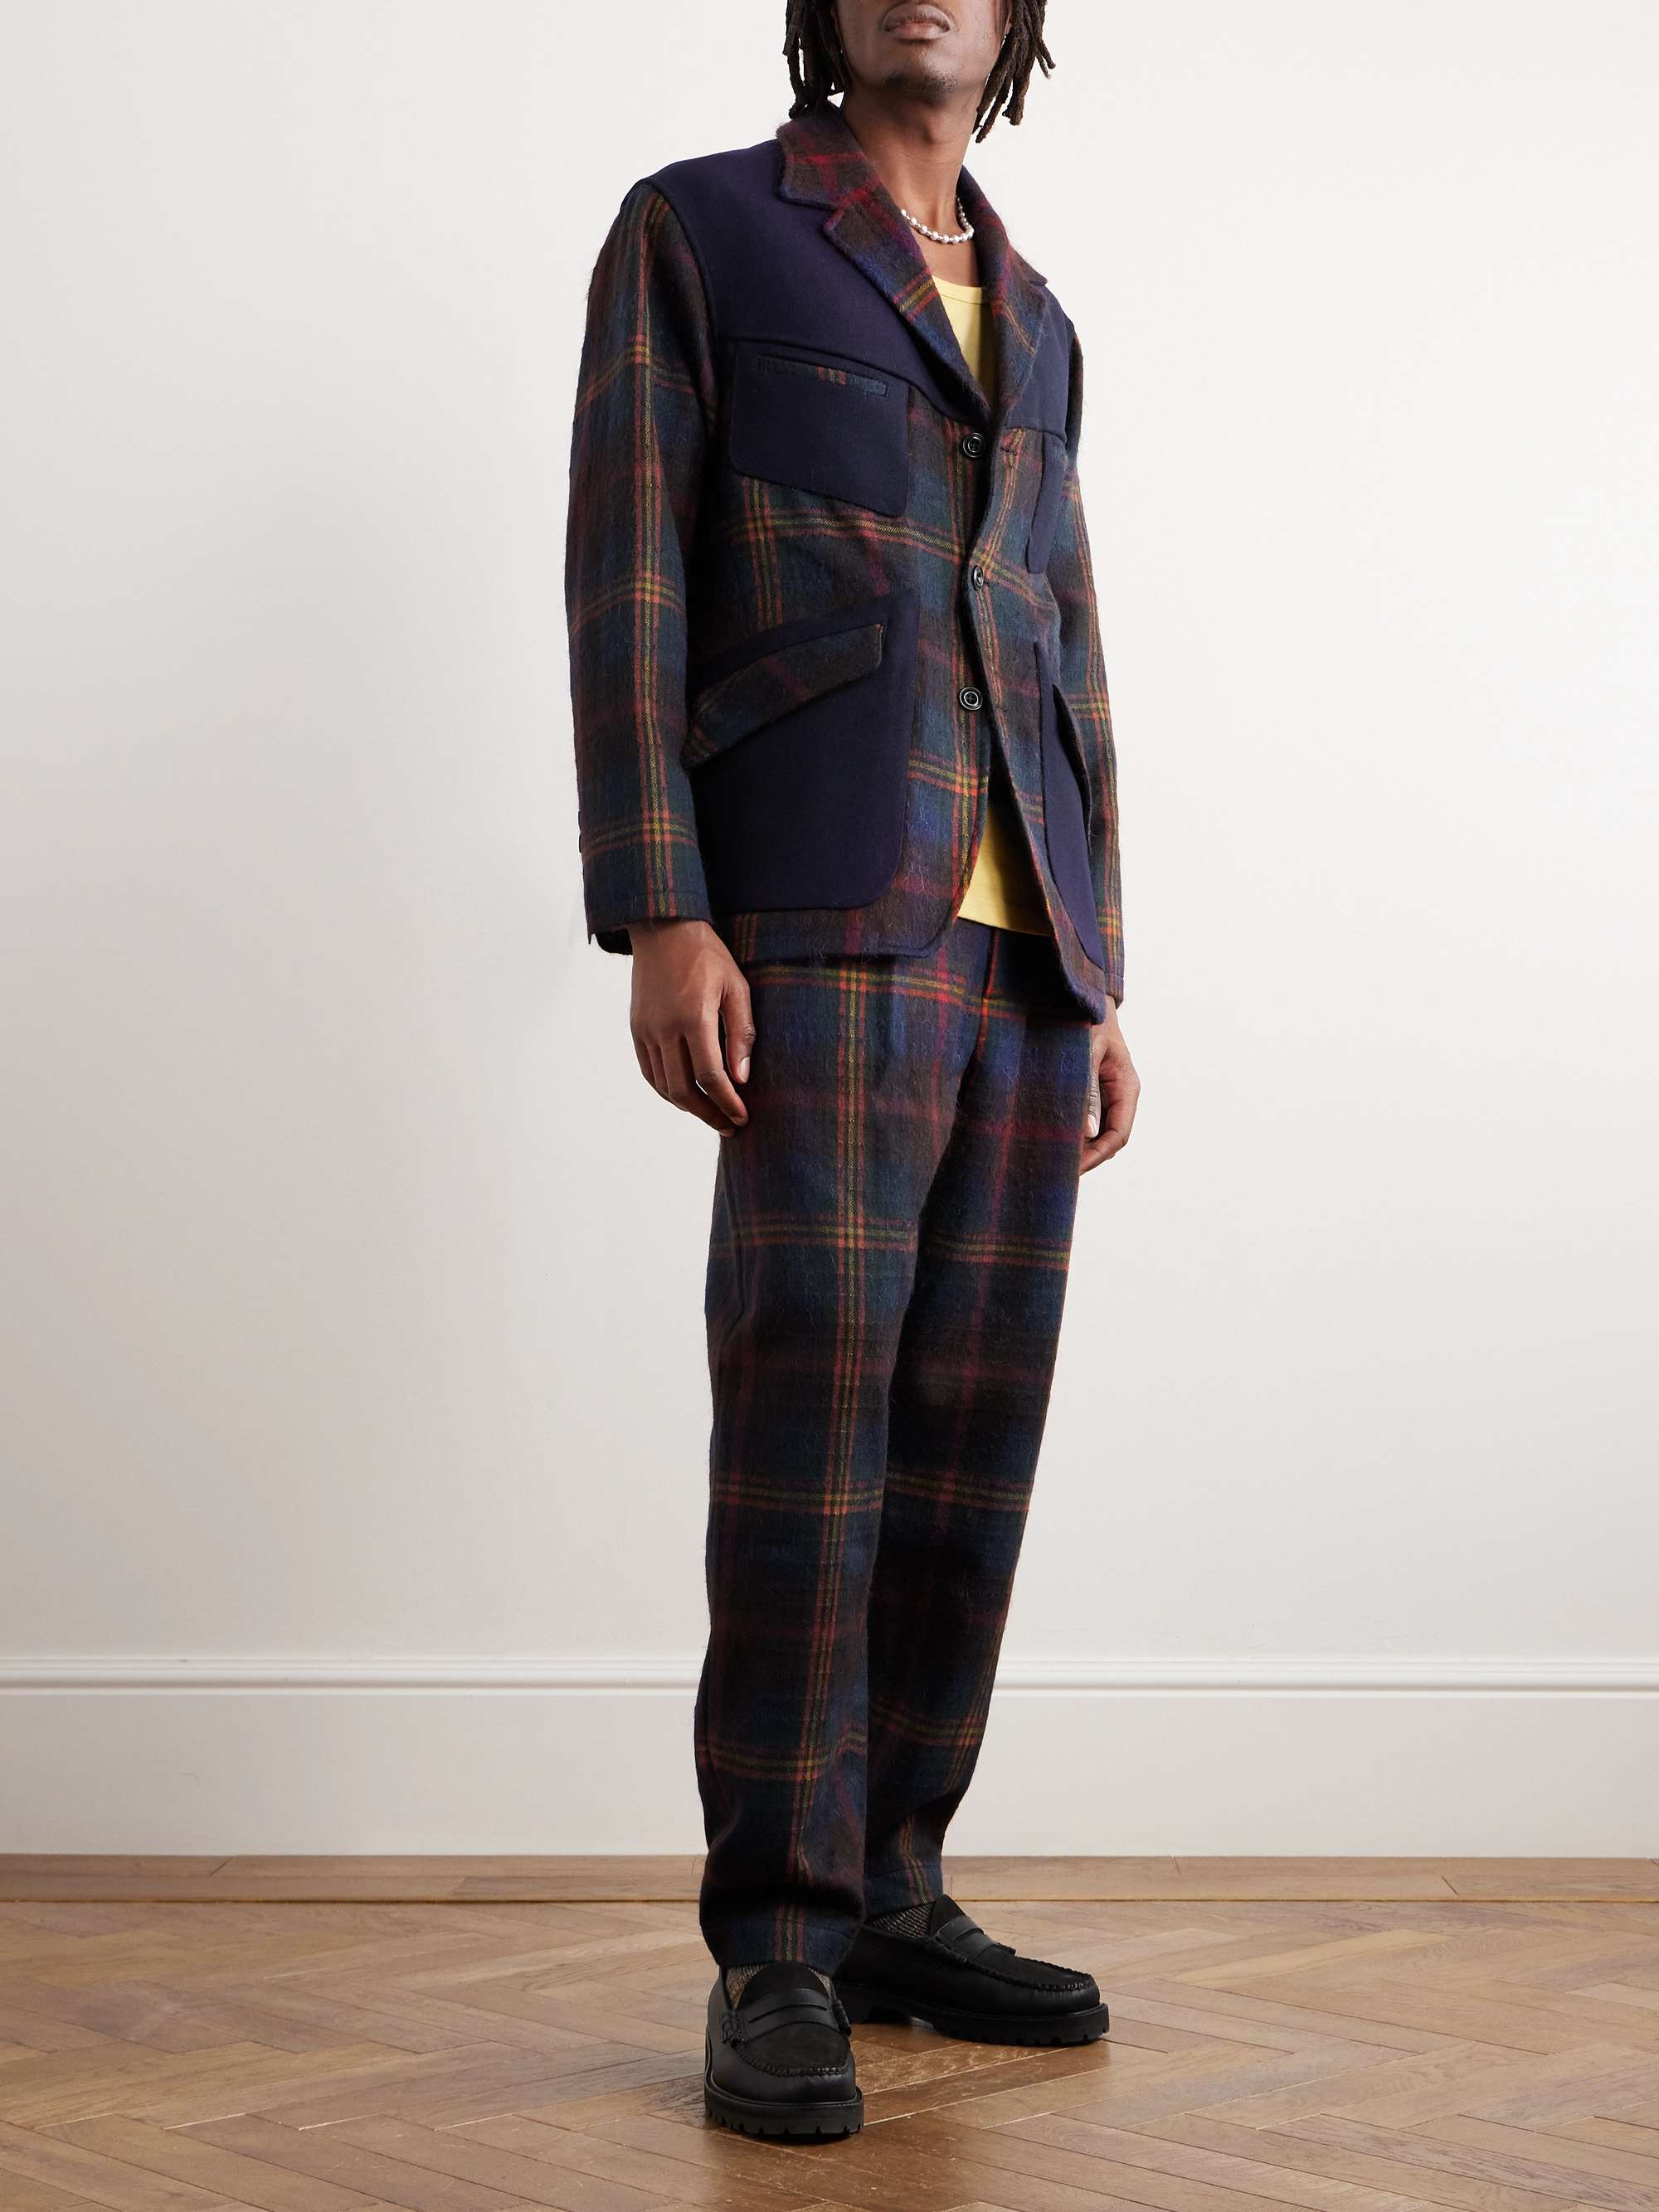 NICHOLAS DALEY Fonte Panelled Checked Wool-Blend Jacket for Men